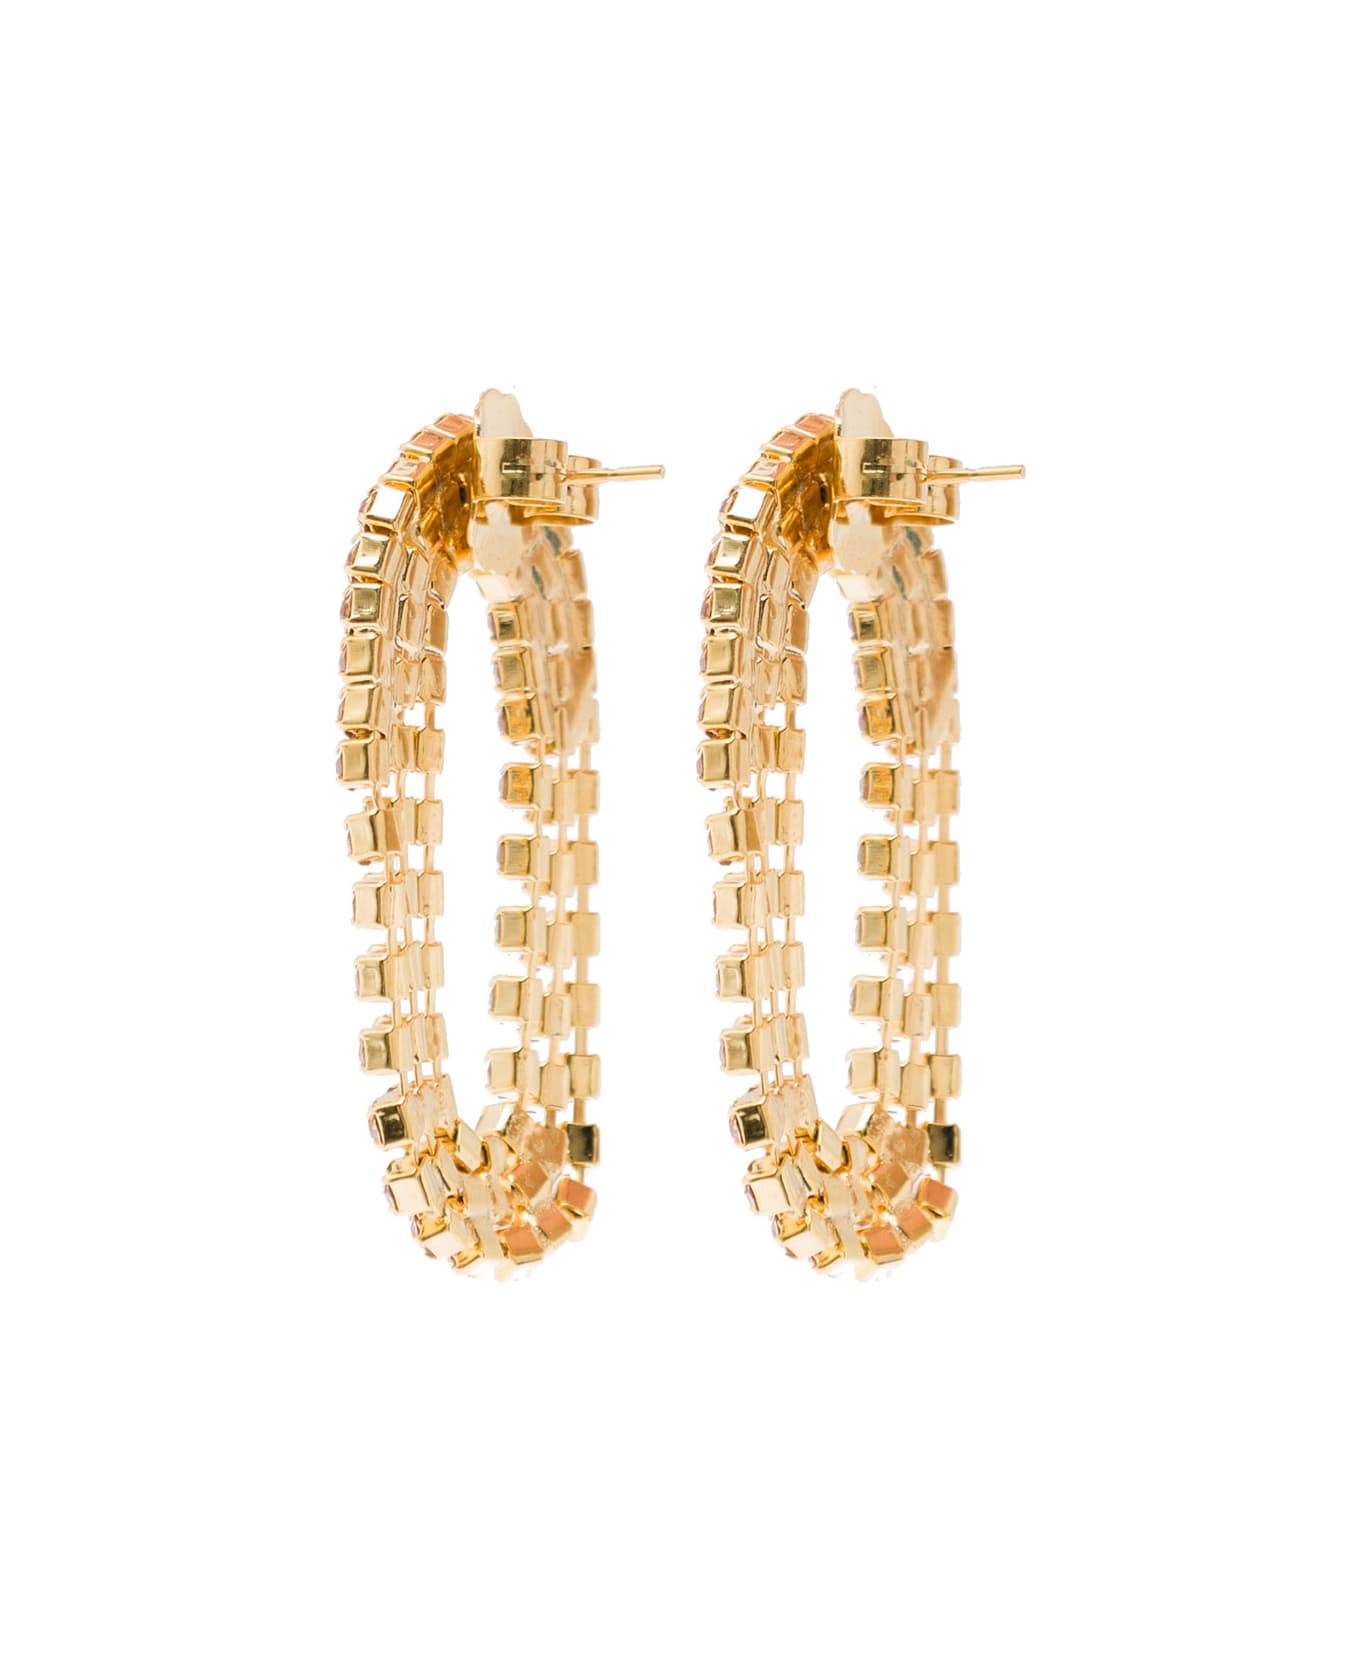 Silvia Gnecchi 'liberty Mini' Earrings With Crystals In Galvanized Brass 24k Gold Woman - Metallic